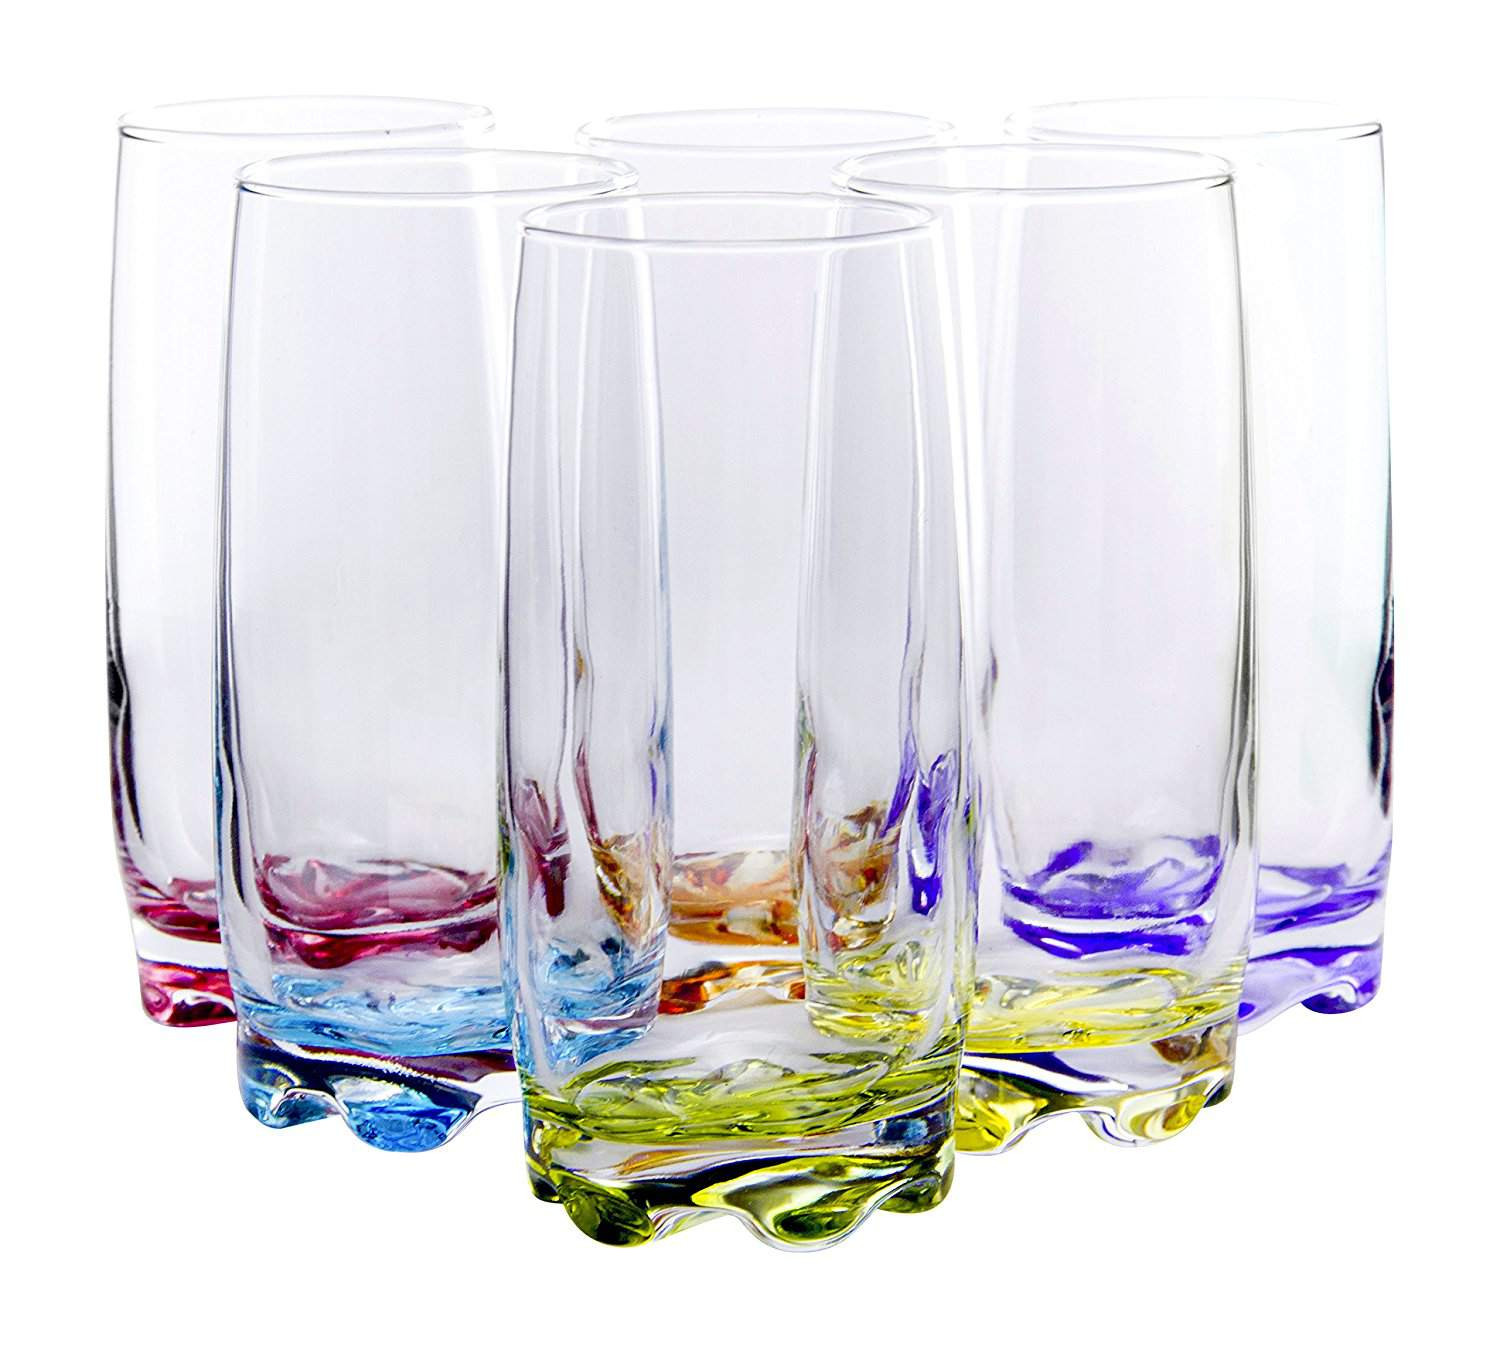 26 attractive Large Glass Goblet Vase 2024 free download large glass goblet vase of the 7 best drinking glasses to buy in 2018 with regard to vibrant splash water beverage highball glasses 13 25 ounce set of 6